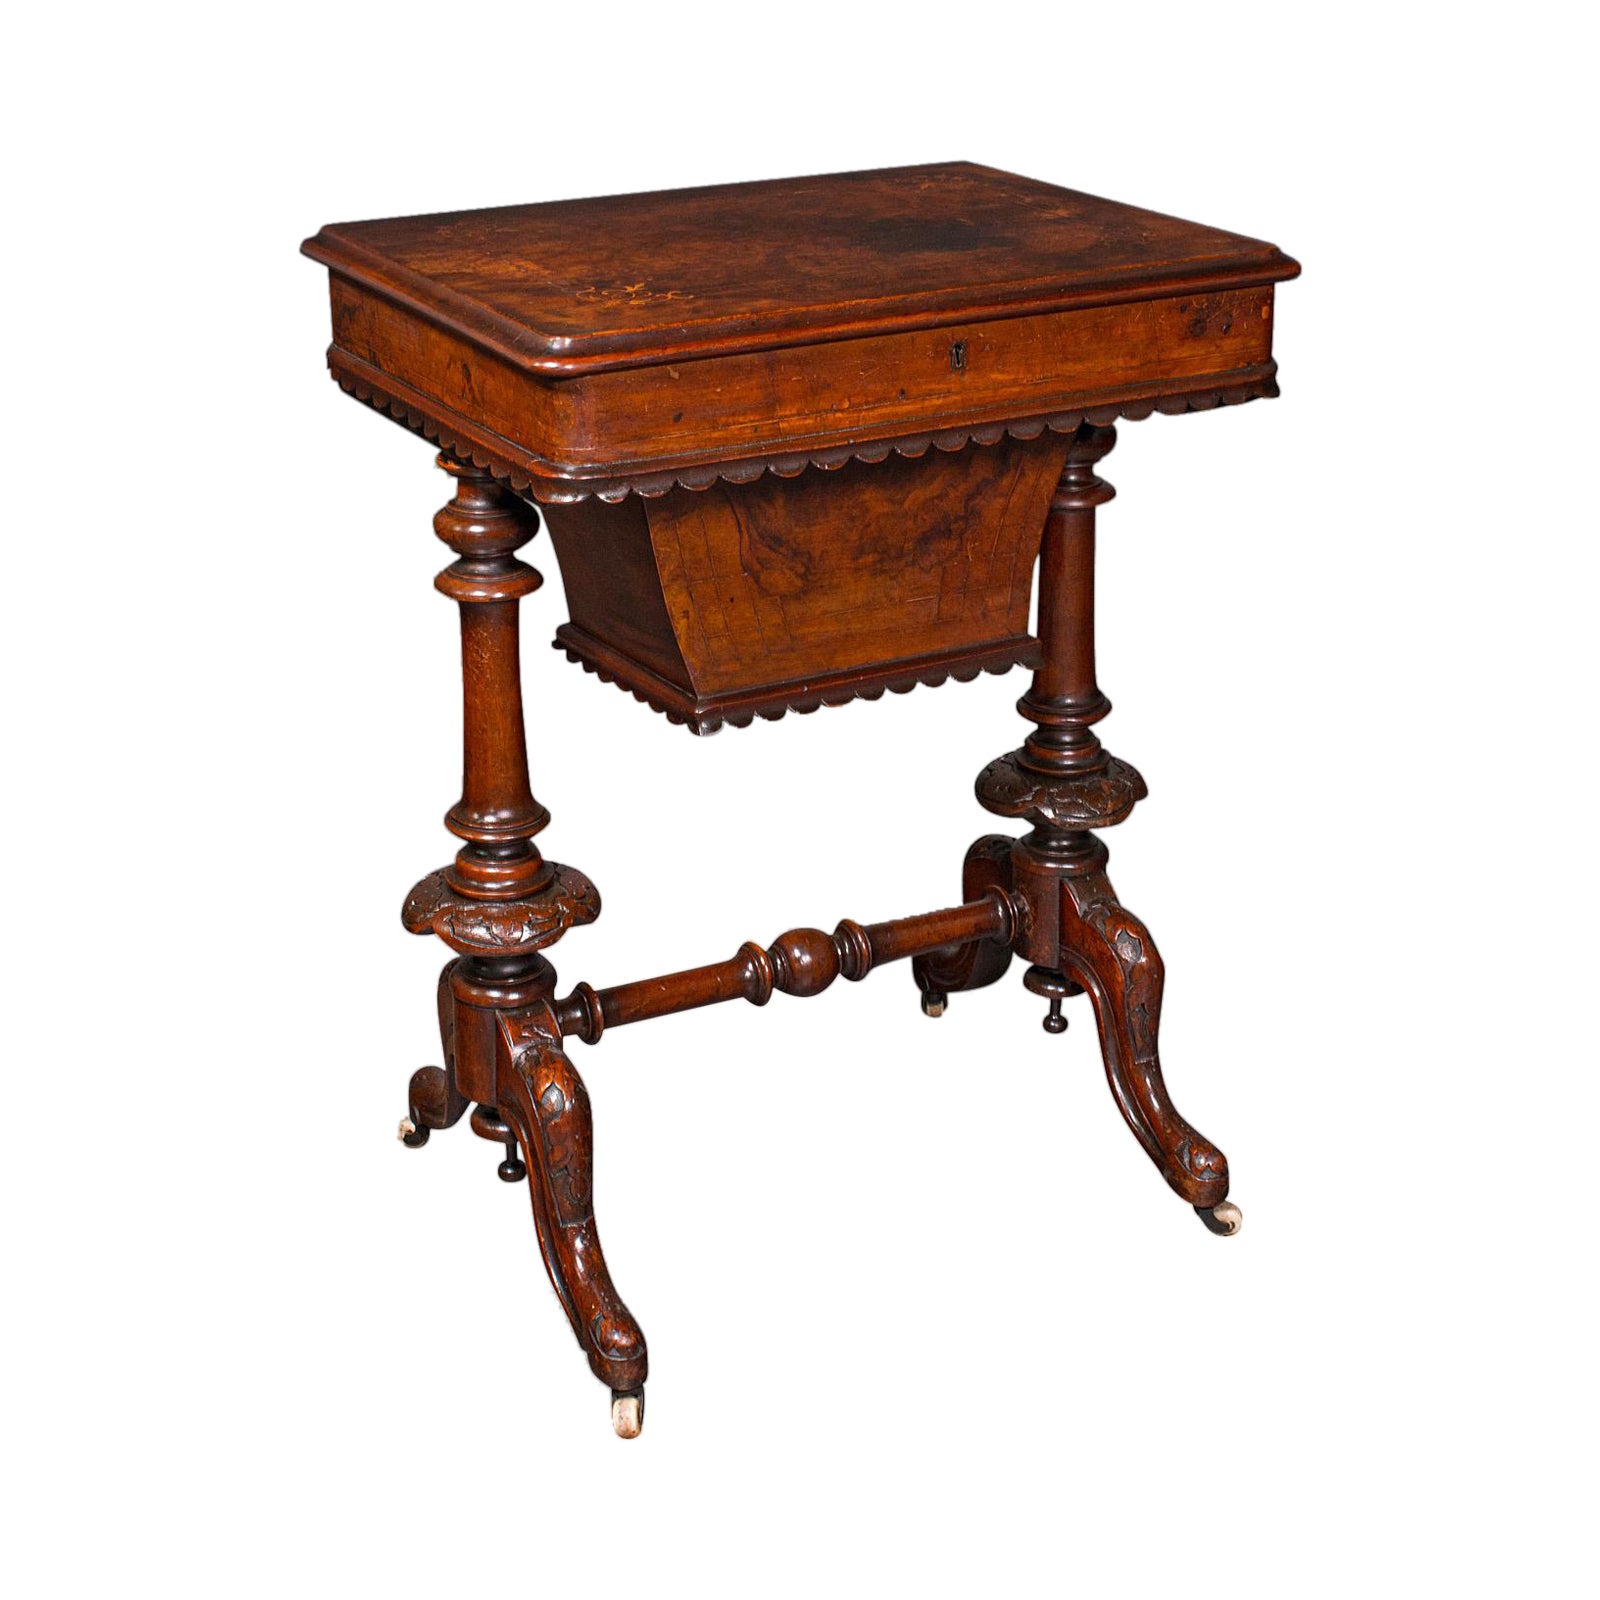 Antique Ladies Work Table, English, Burr Walnut, Sewing Table, Victorian, C.1850 For Sale